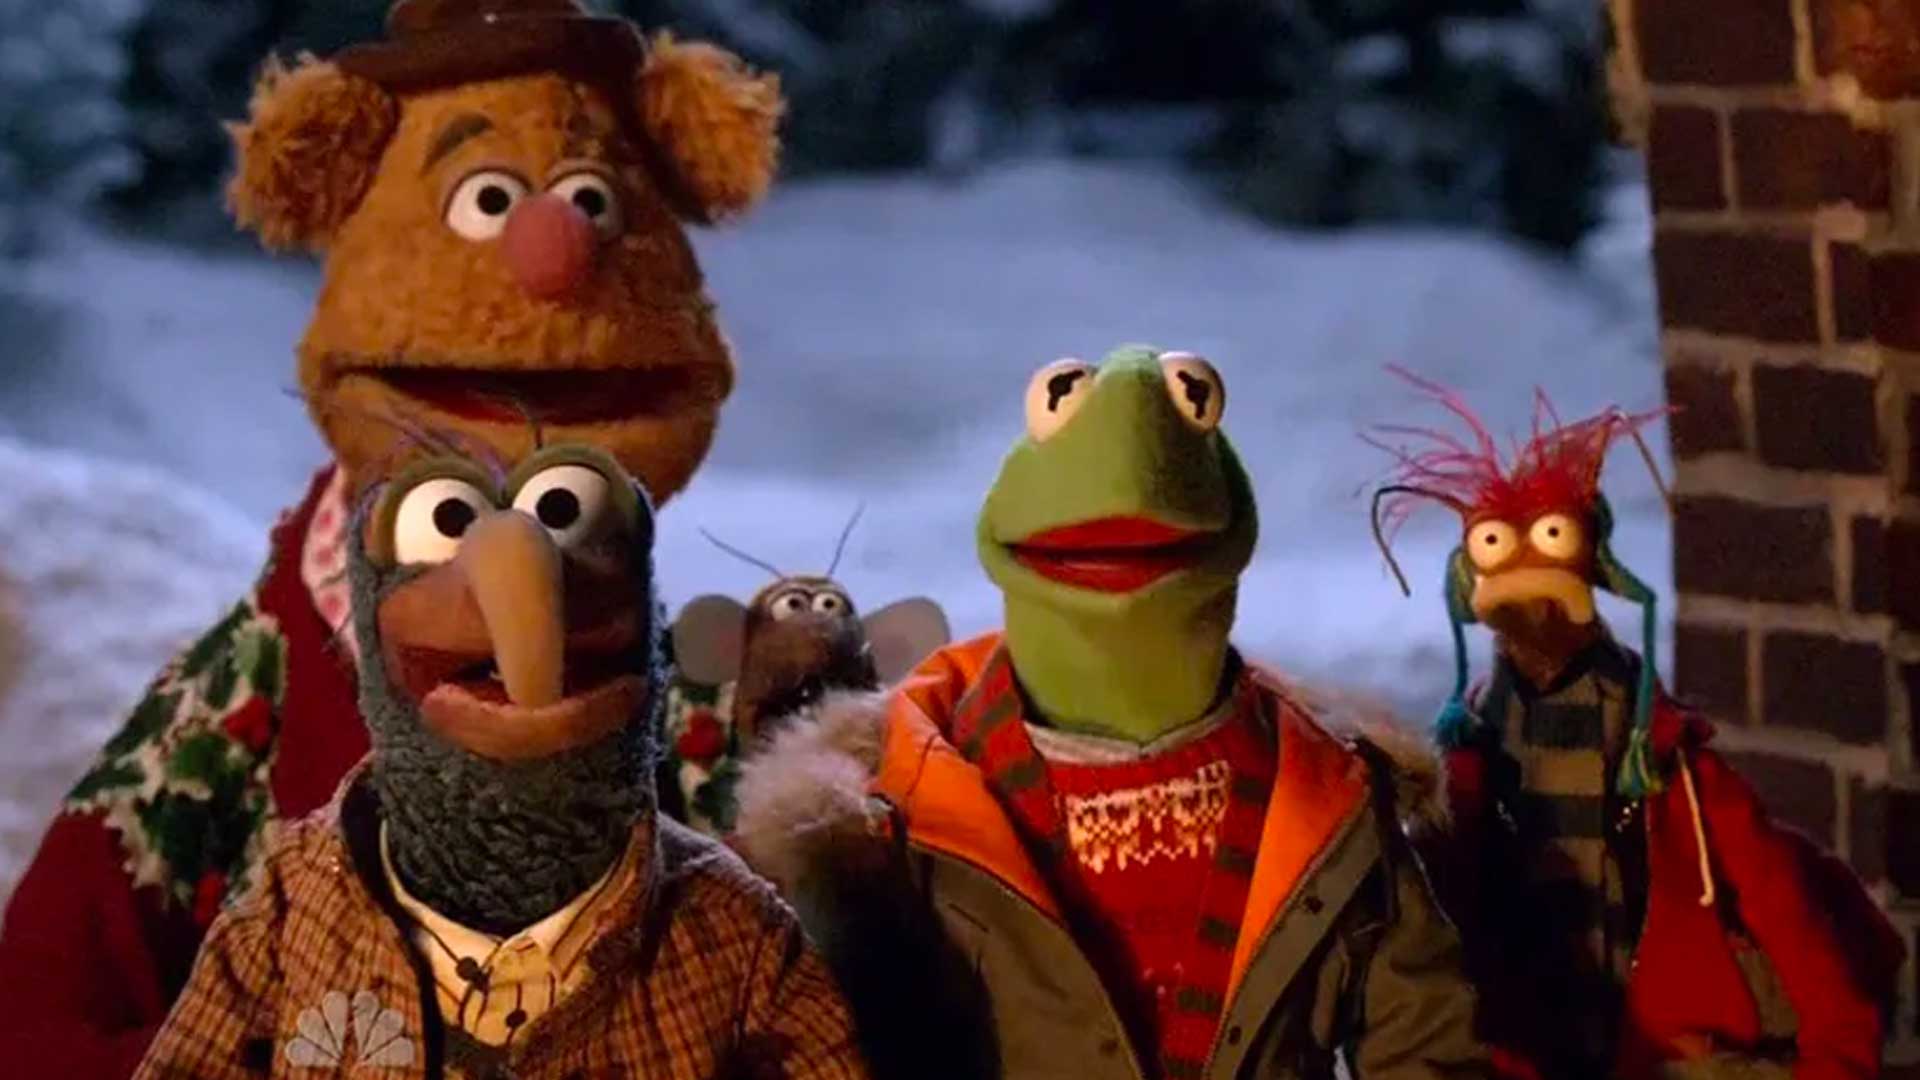 A scene from A Muppets Christmas: Letters to Santa